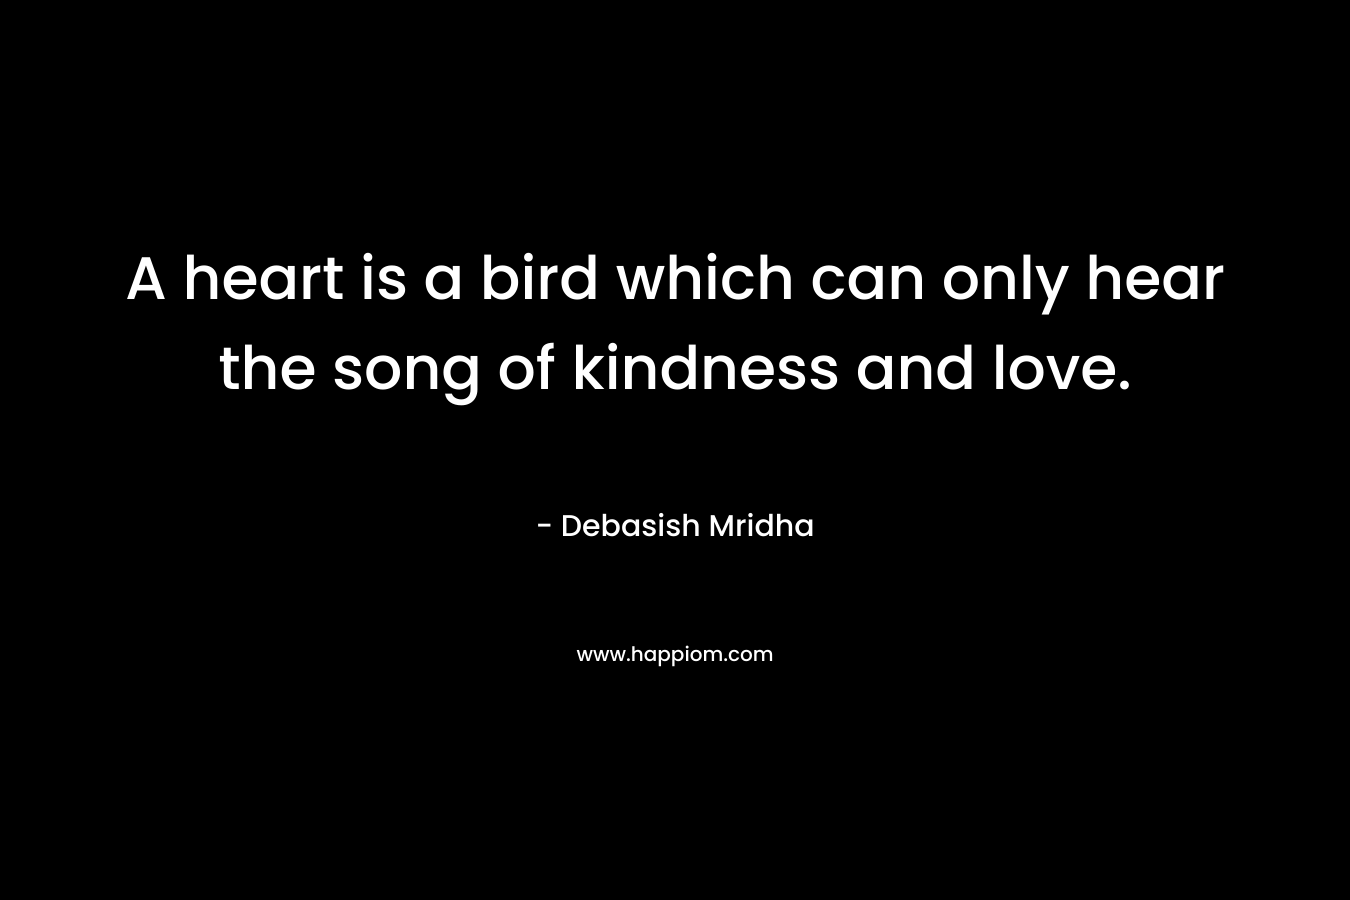 A heart is a bird which can only hear the song of kindness and love.